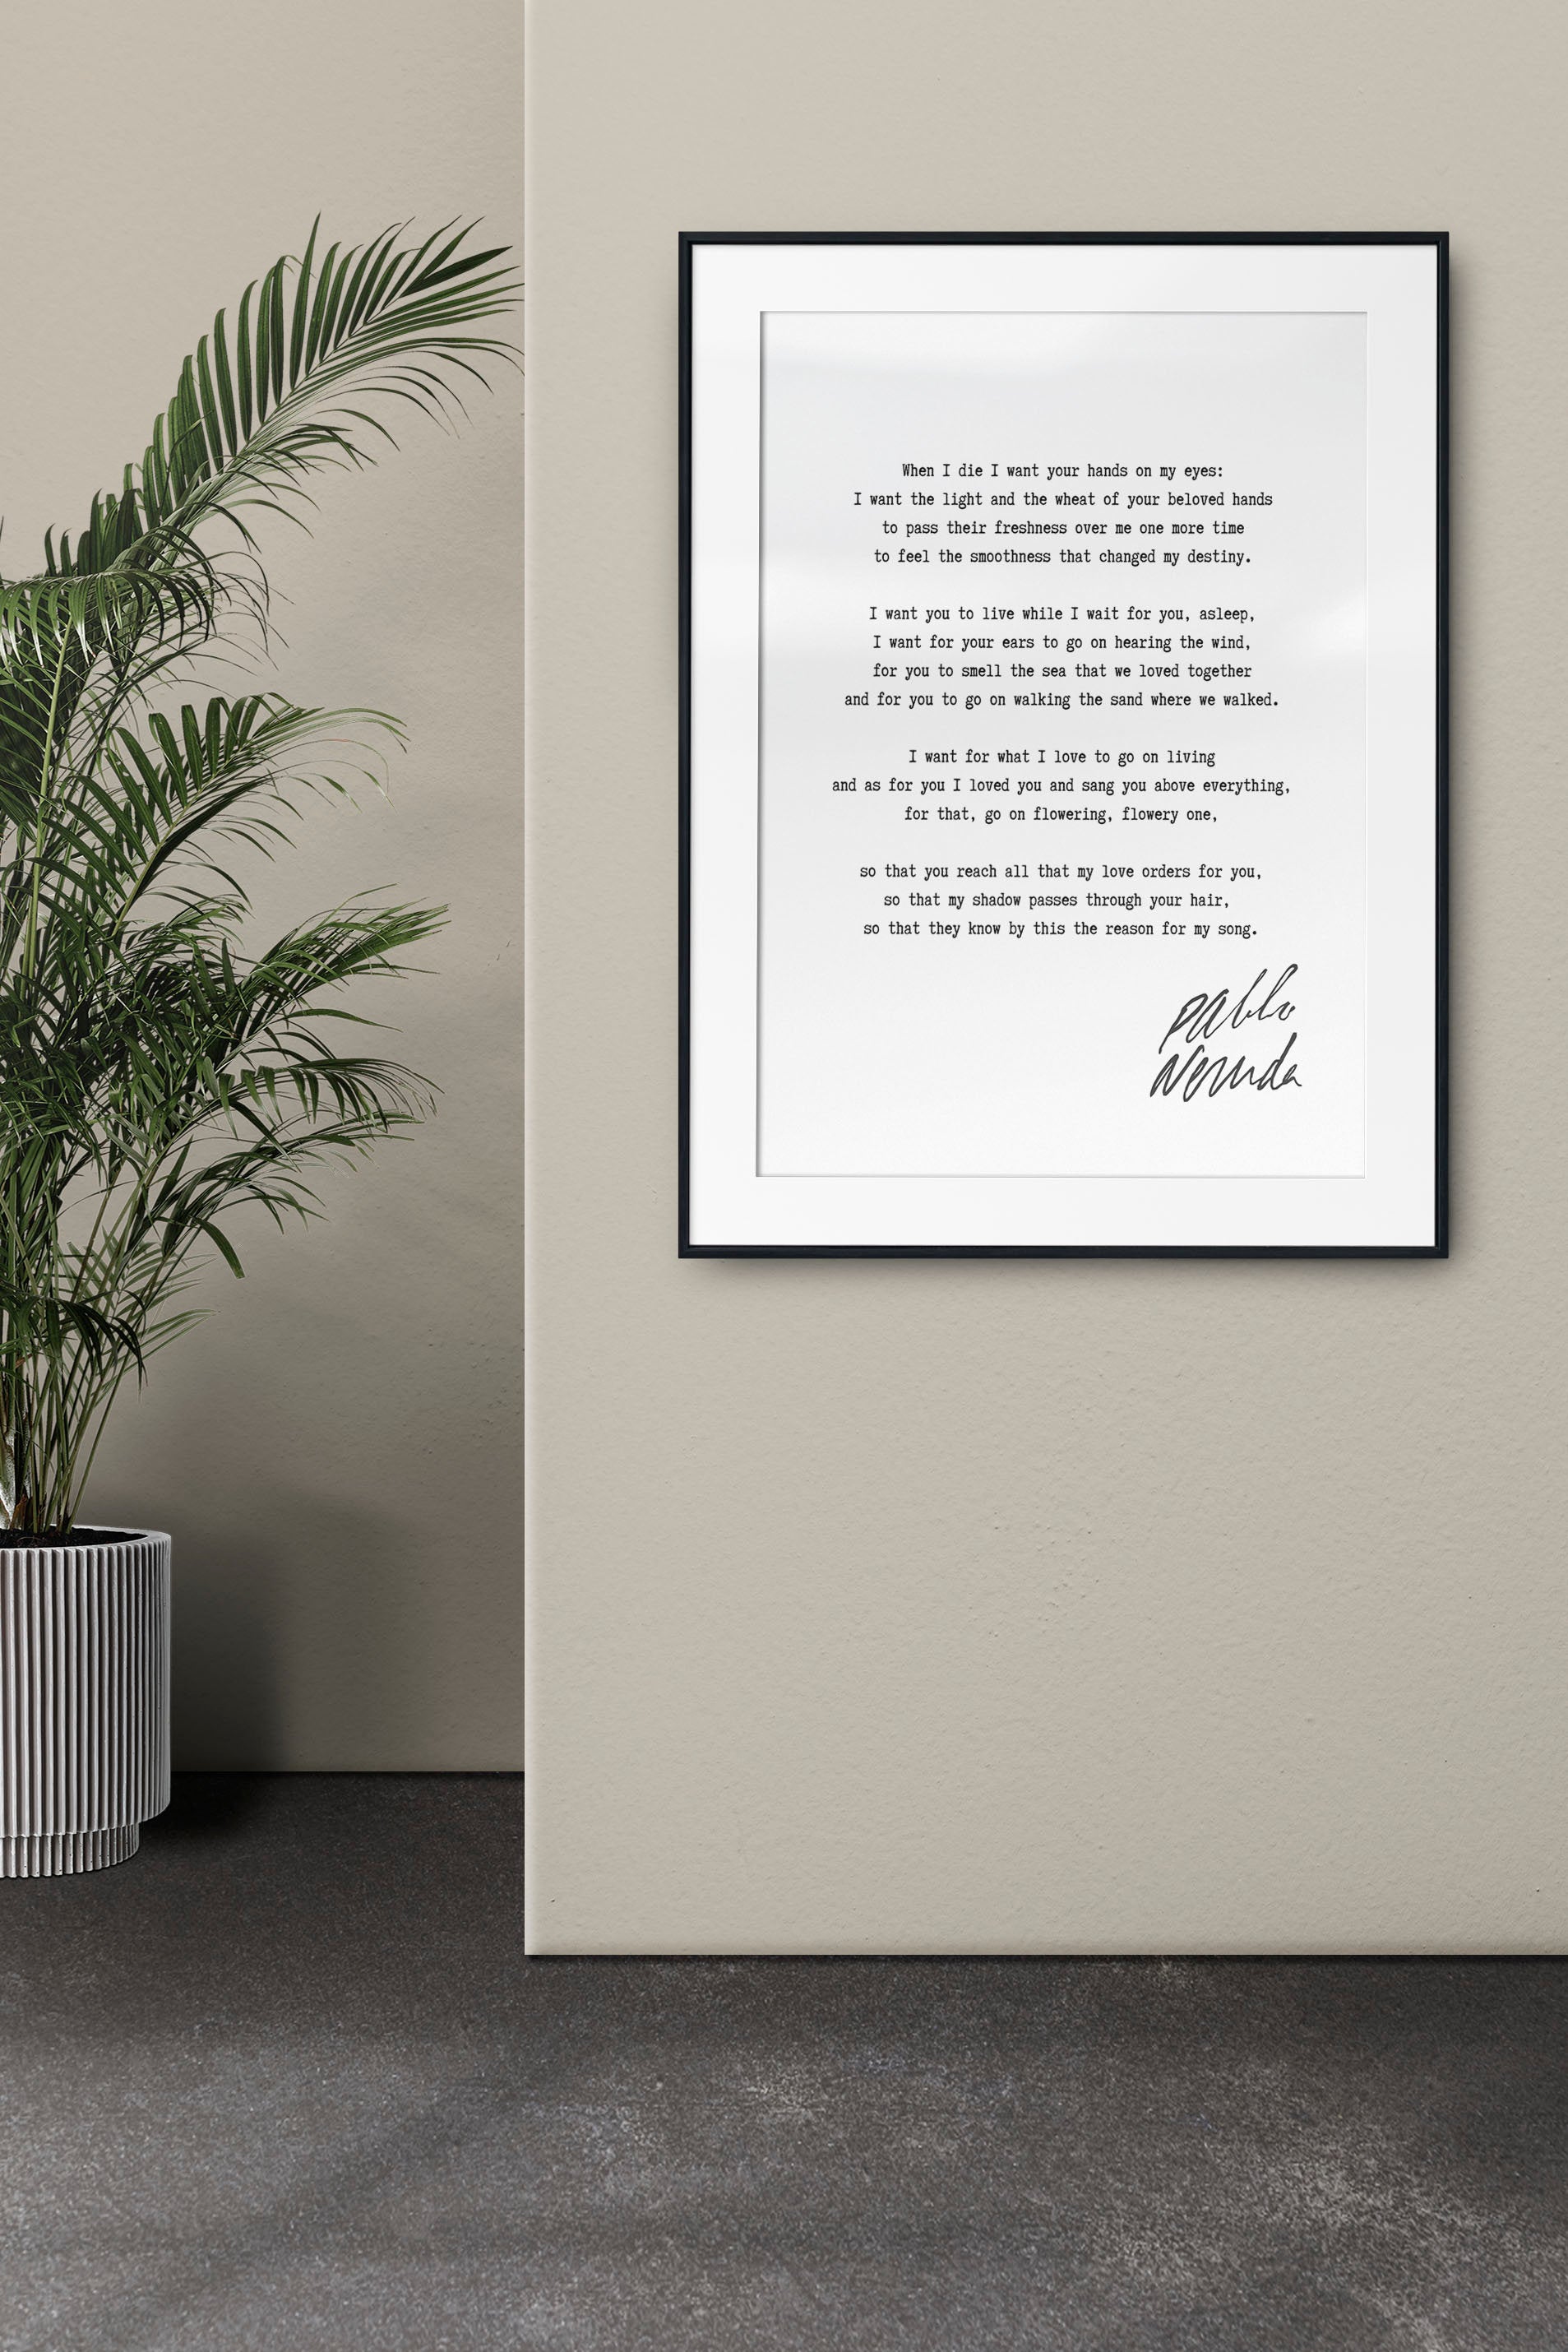 Pablo Neruda When I die I want your hands on my eyes, Unframed or Framed Romantic Love Poem Print in Black & White Wall Art Decor